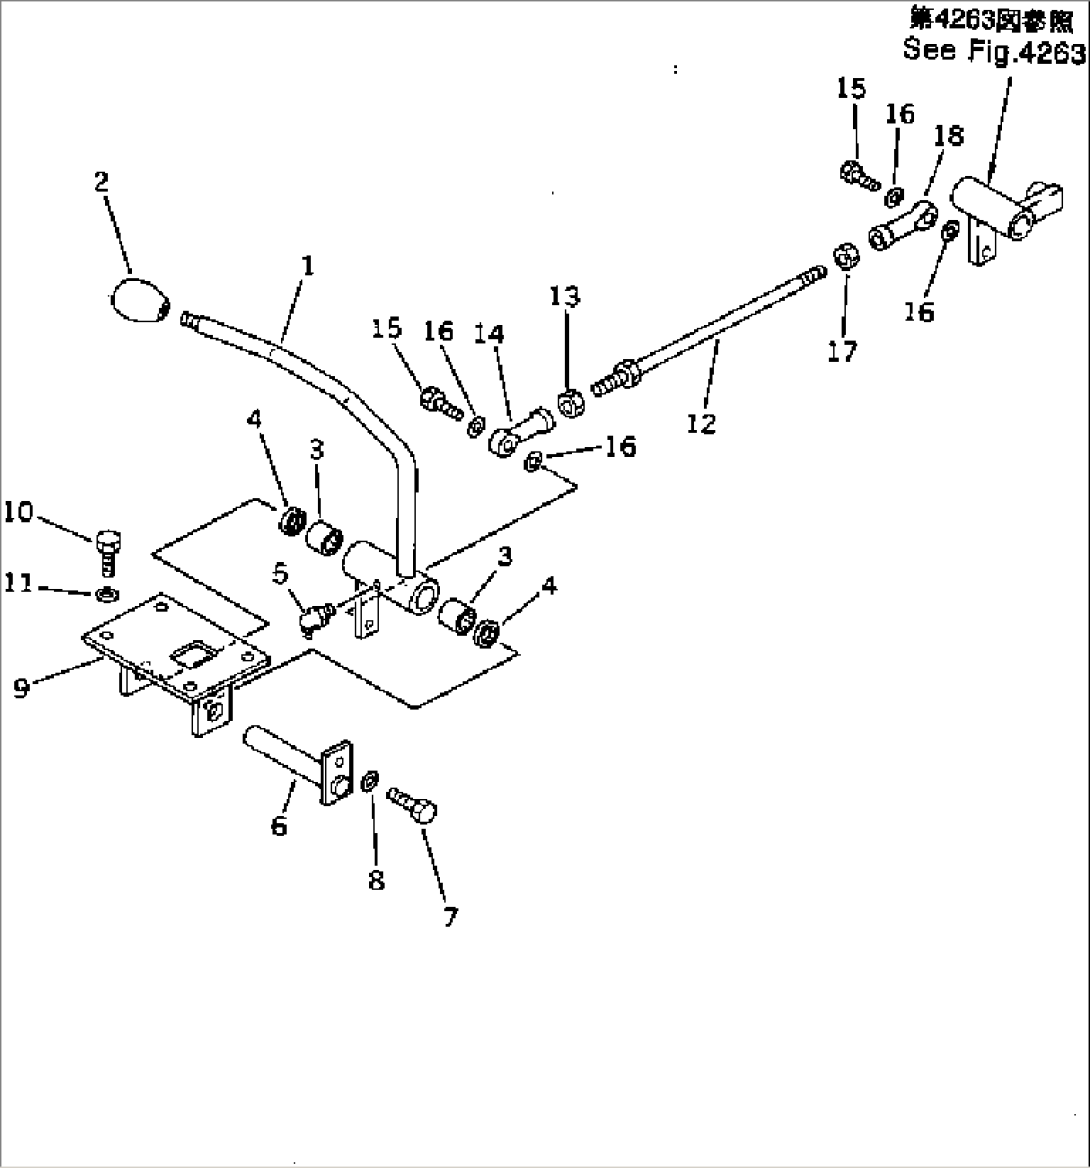 SPECIAL WORK EQUIPMENT CONTROL LINKAGE (1/2) (FOR BLADE)